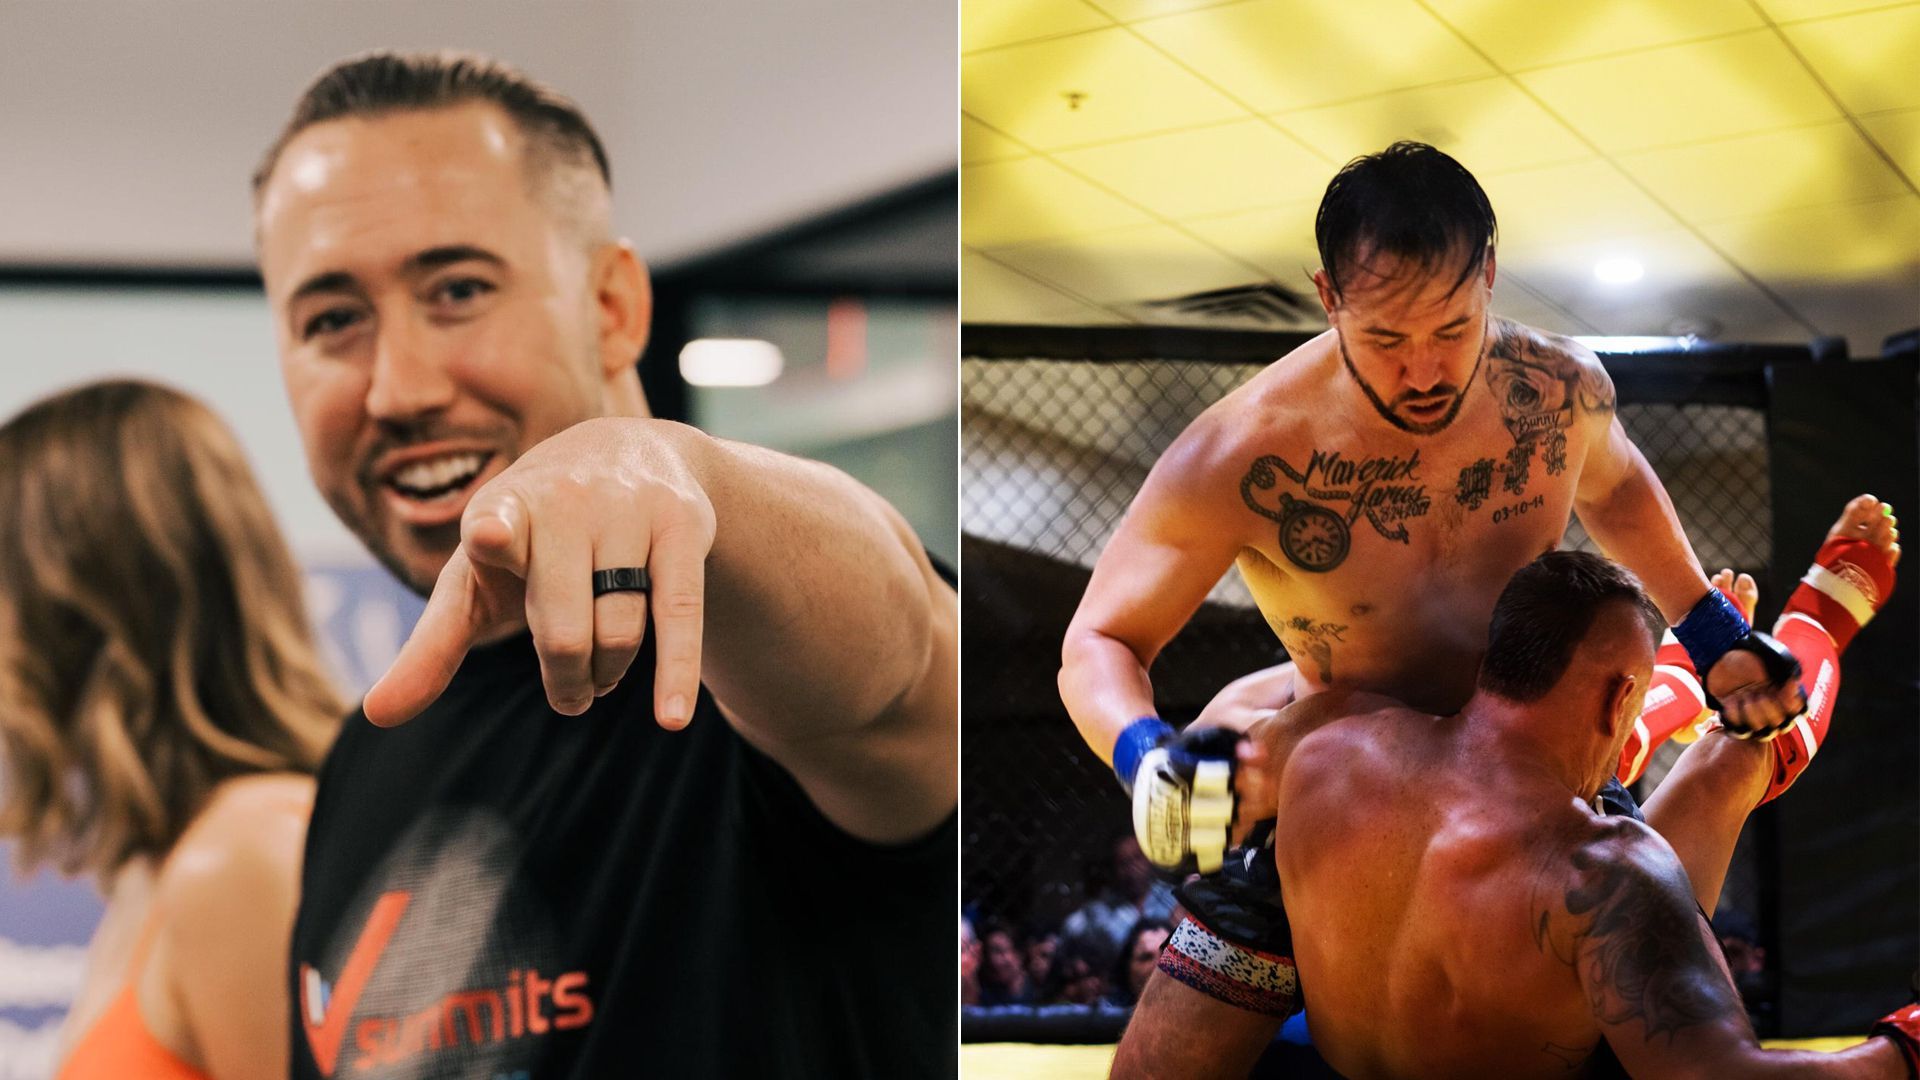 A photo collage of Stan Liberatore repping Vsummits and fighting in the ring. 